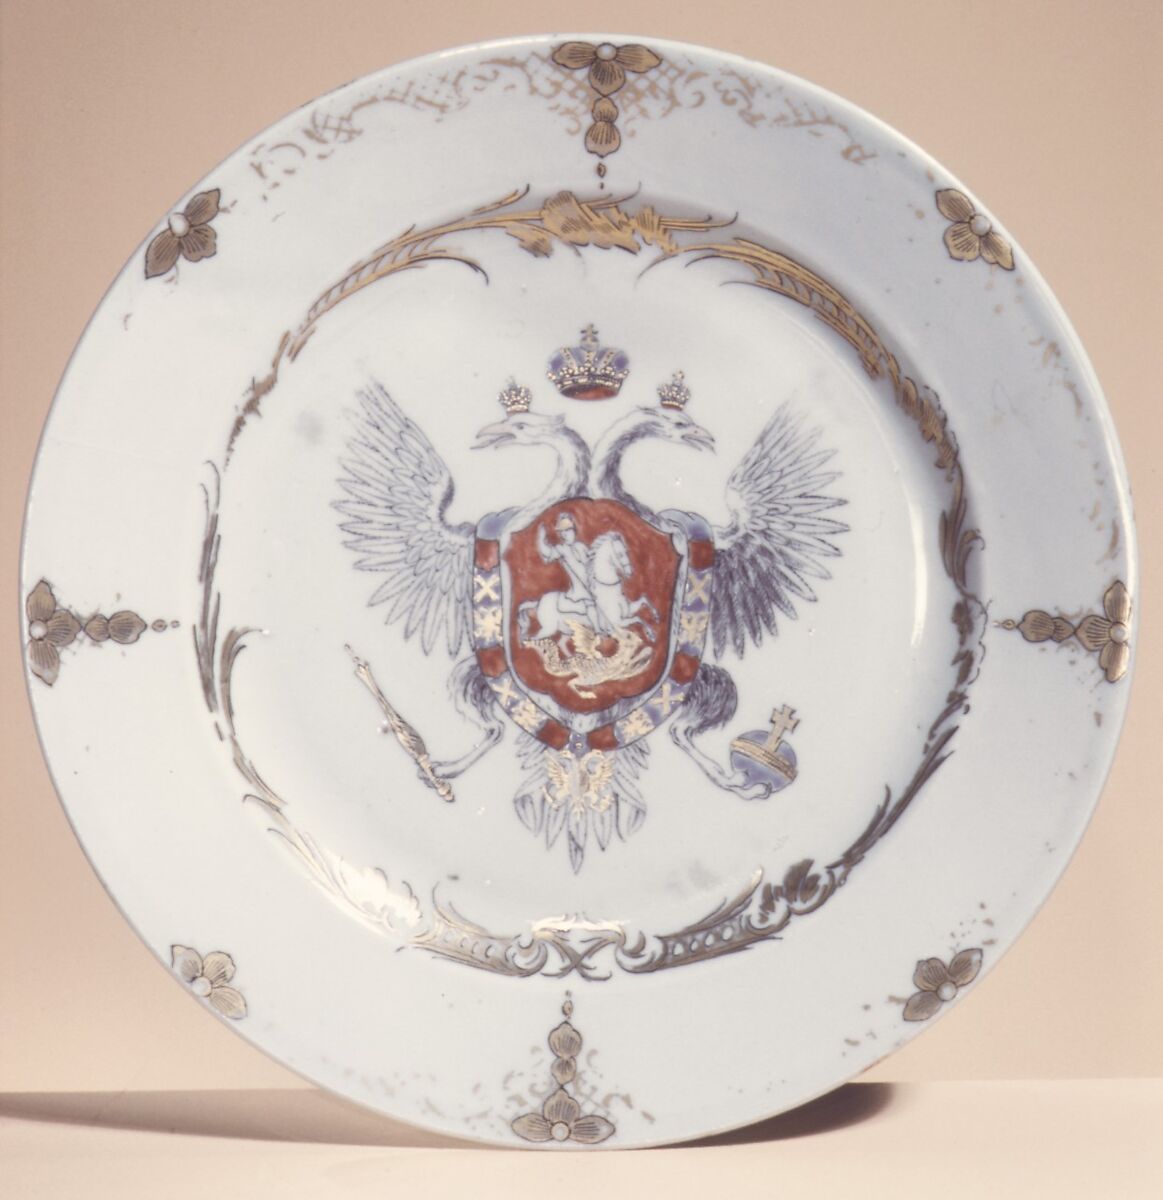 Dish (one of two), Hard-paste porcelain, Chinese, for Russian market 